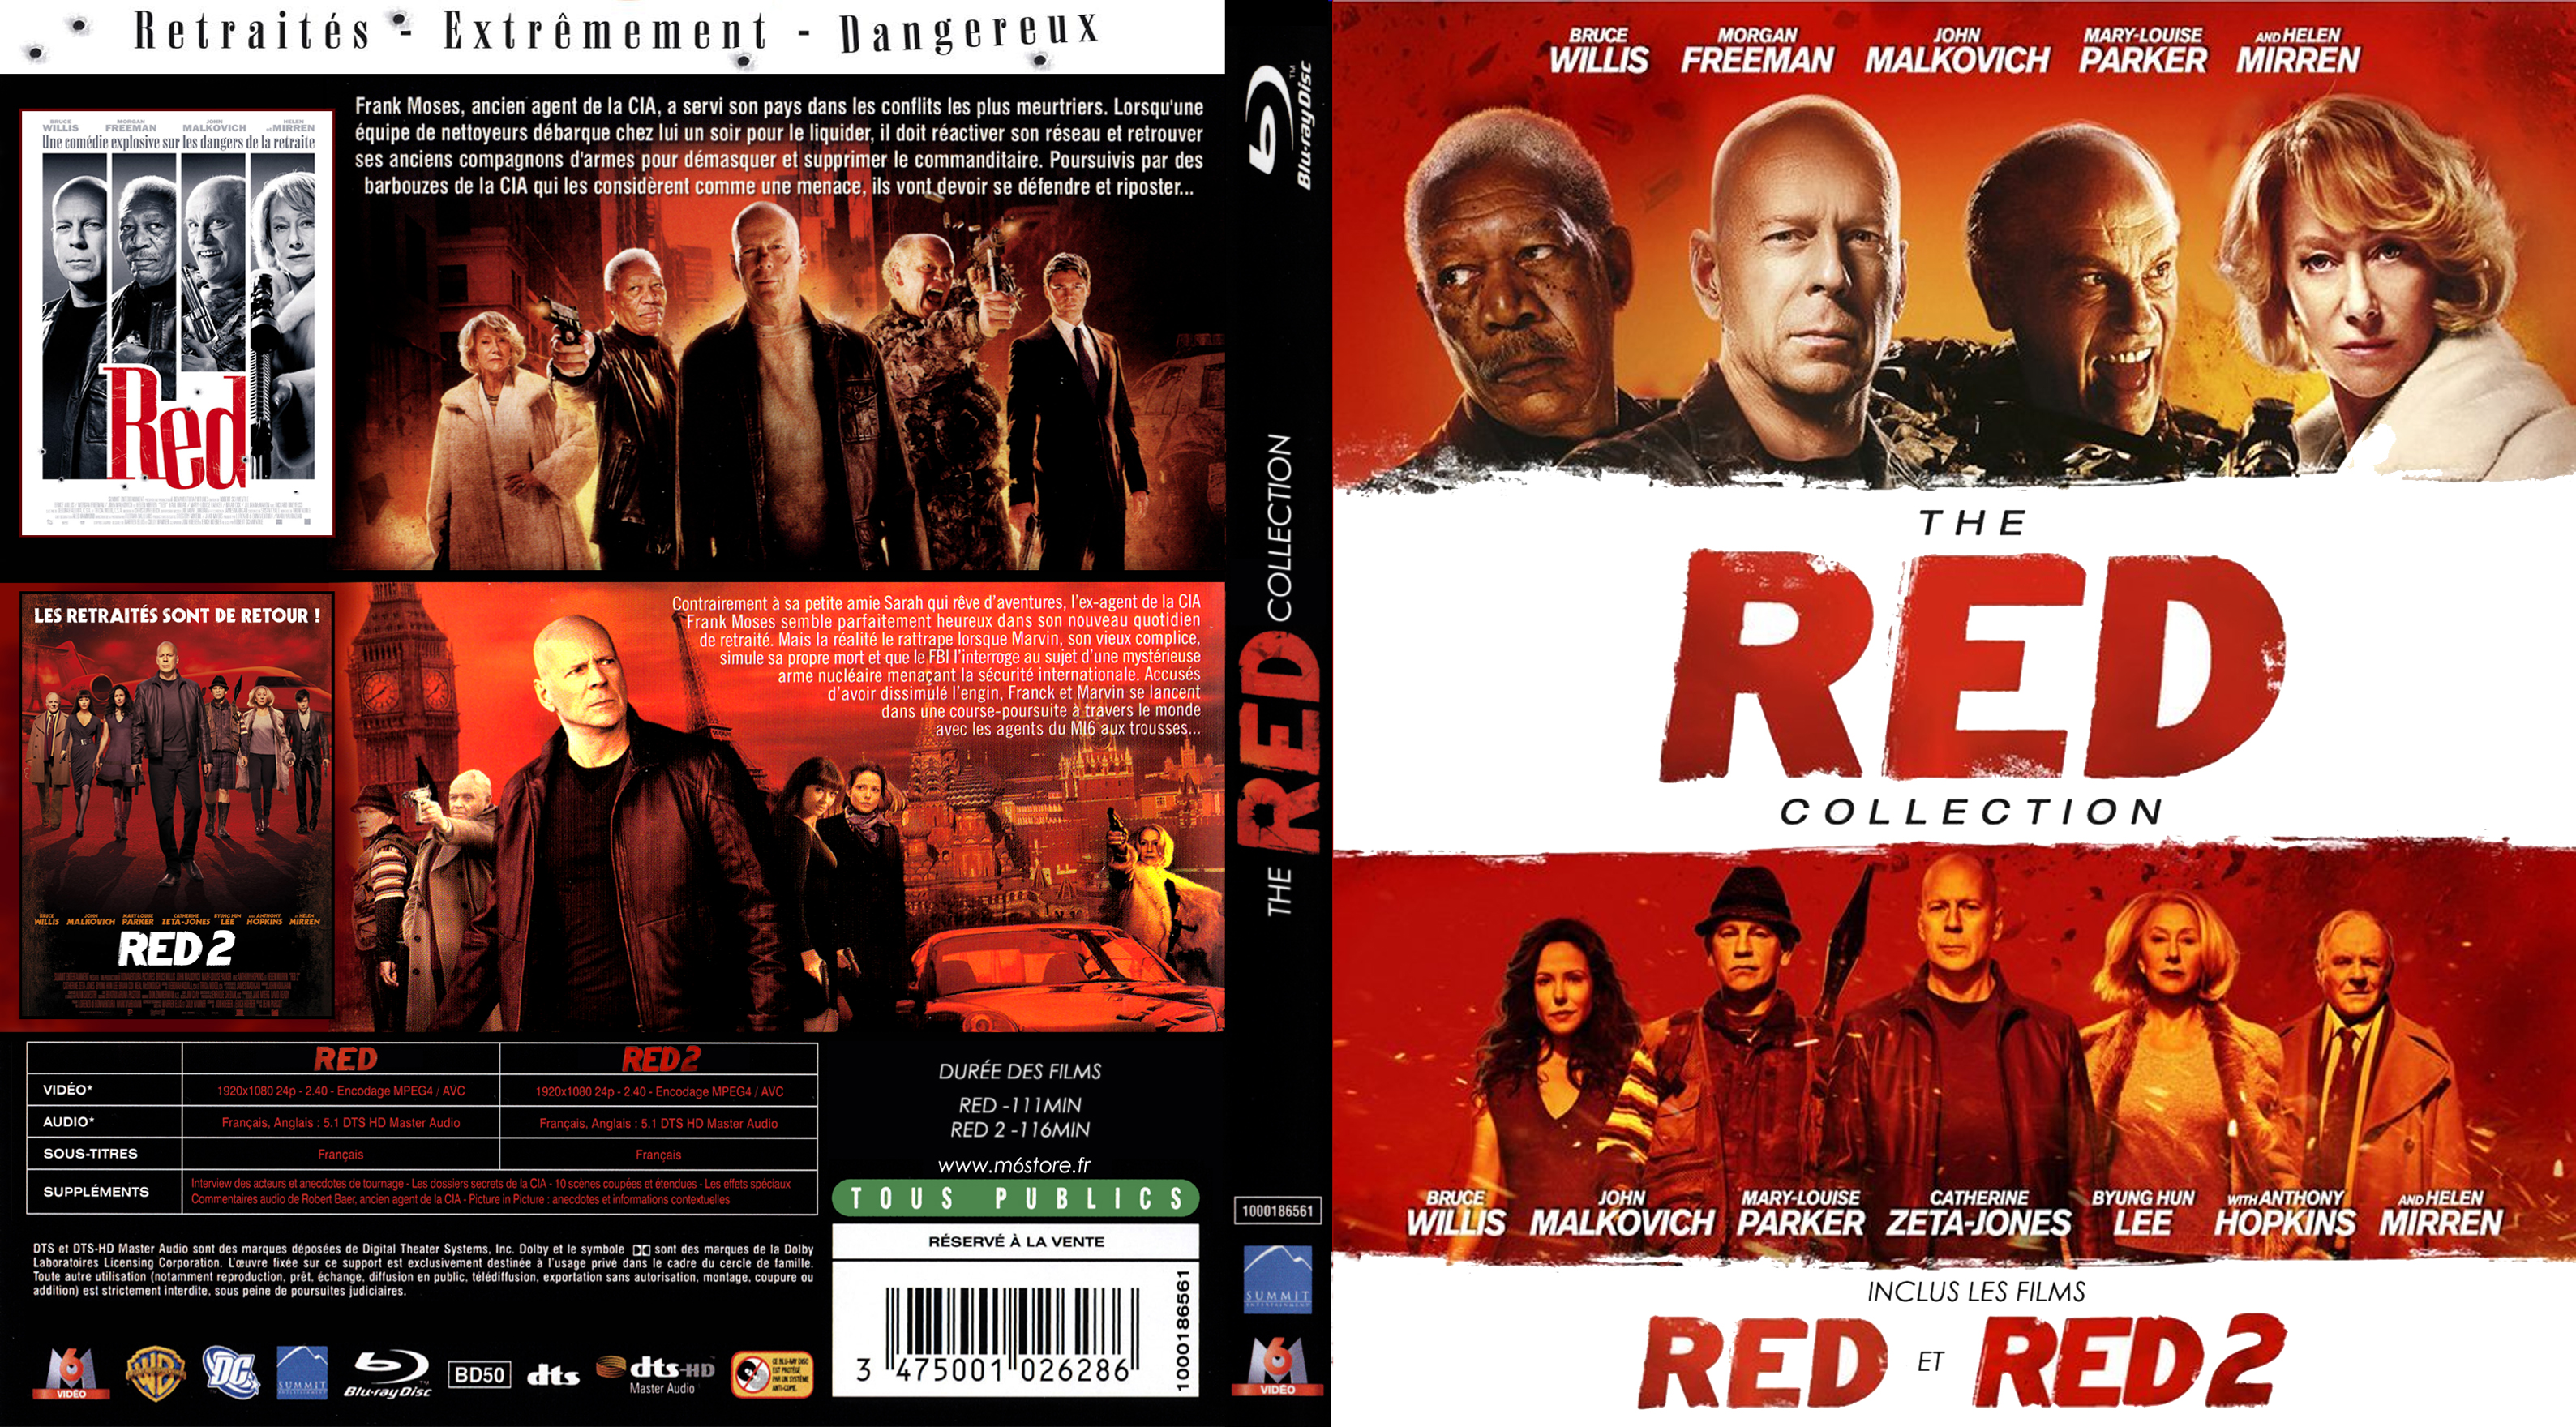 Jaquette DVD Red + Red 2 custom (BLU-RAY)